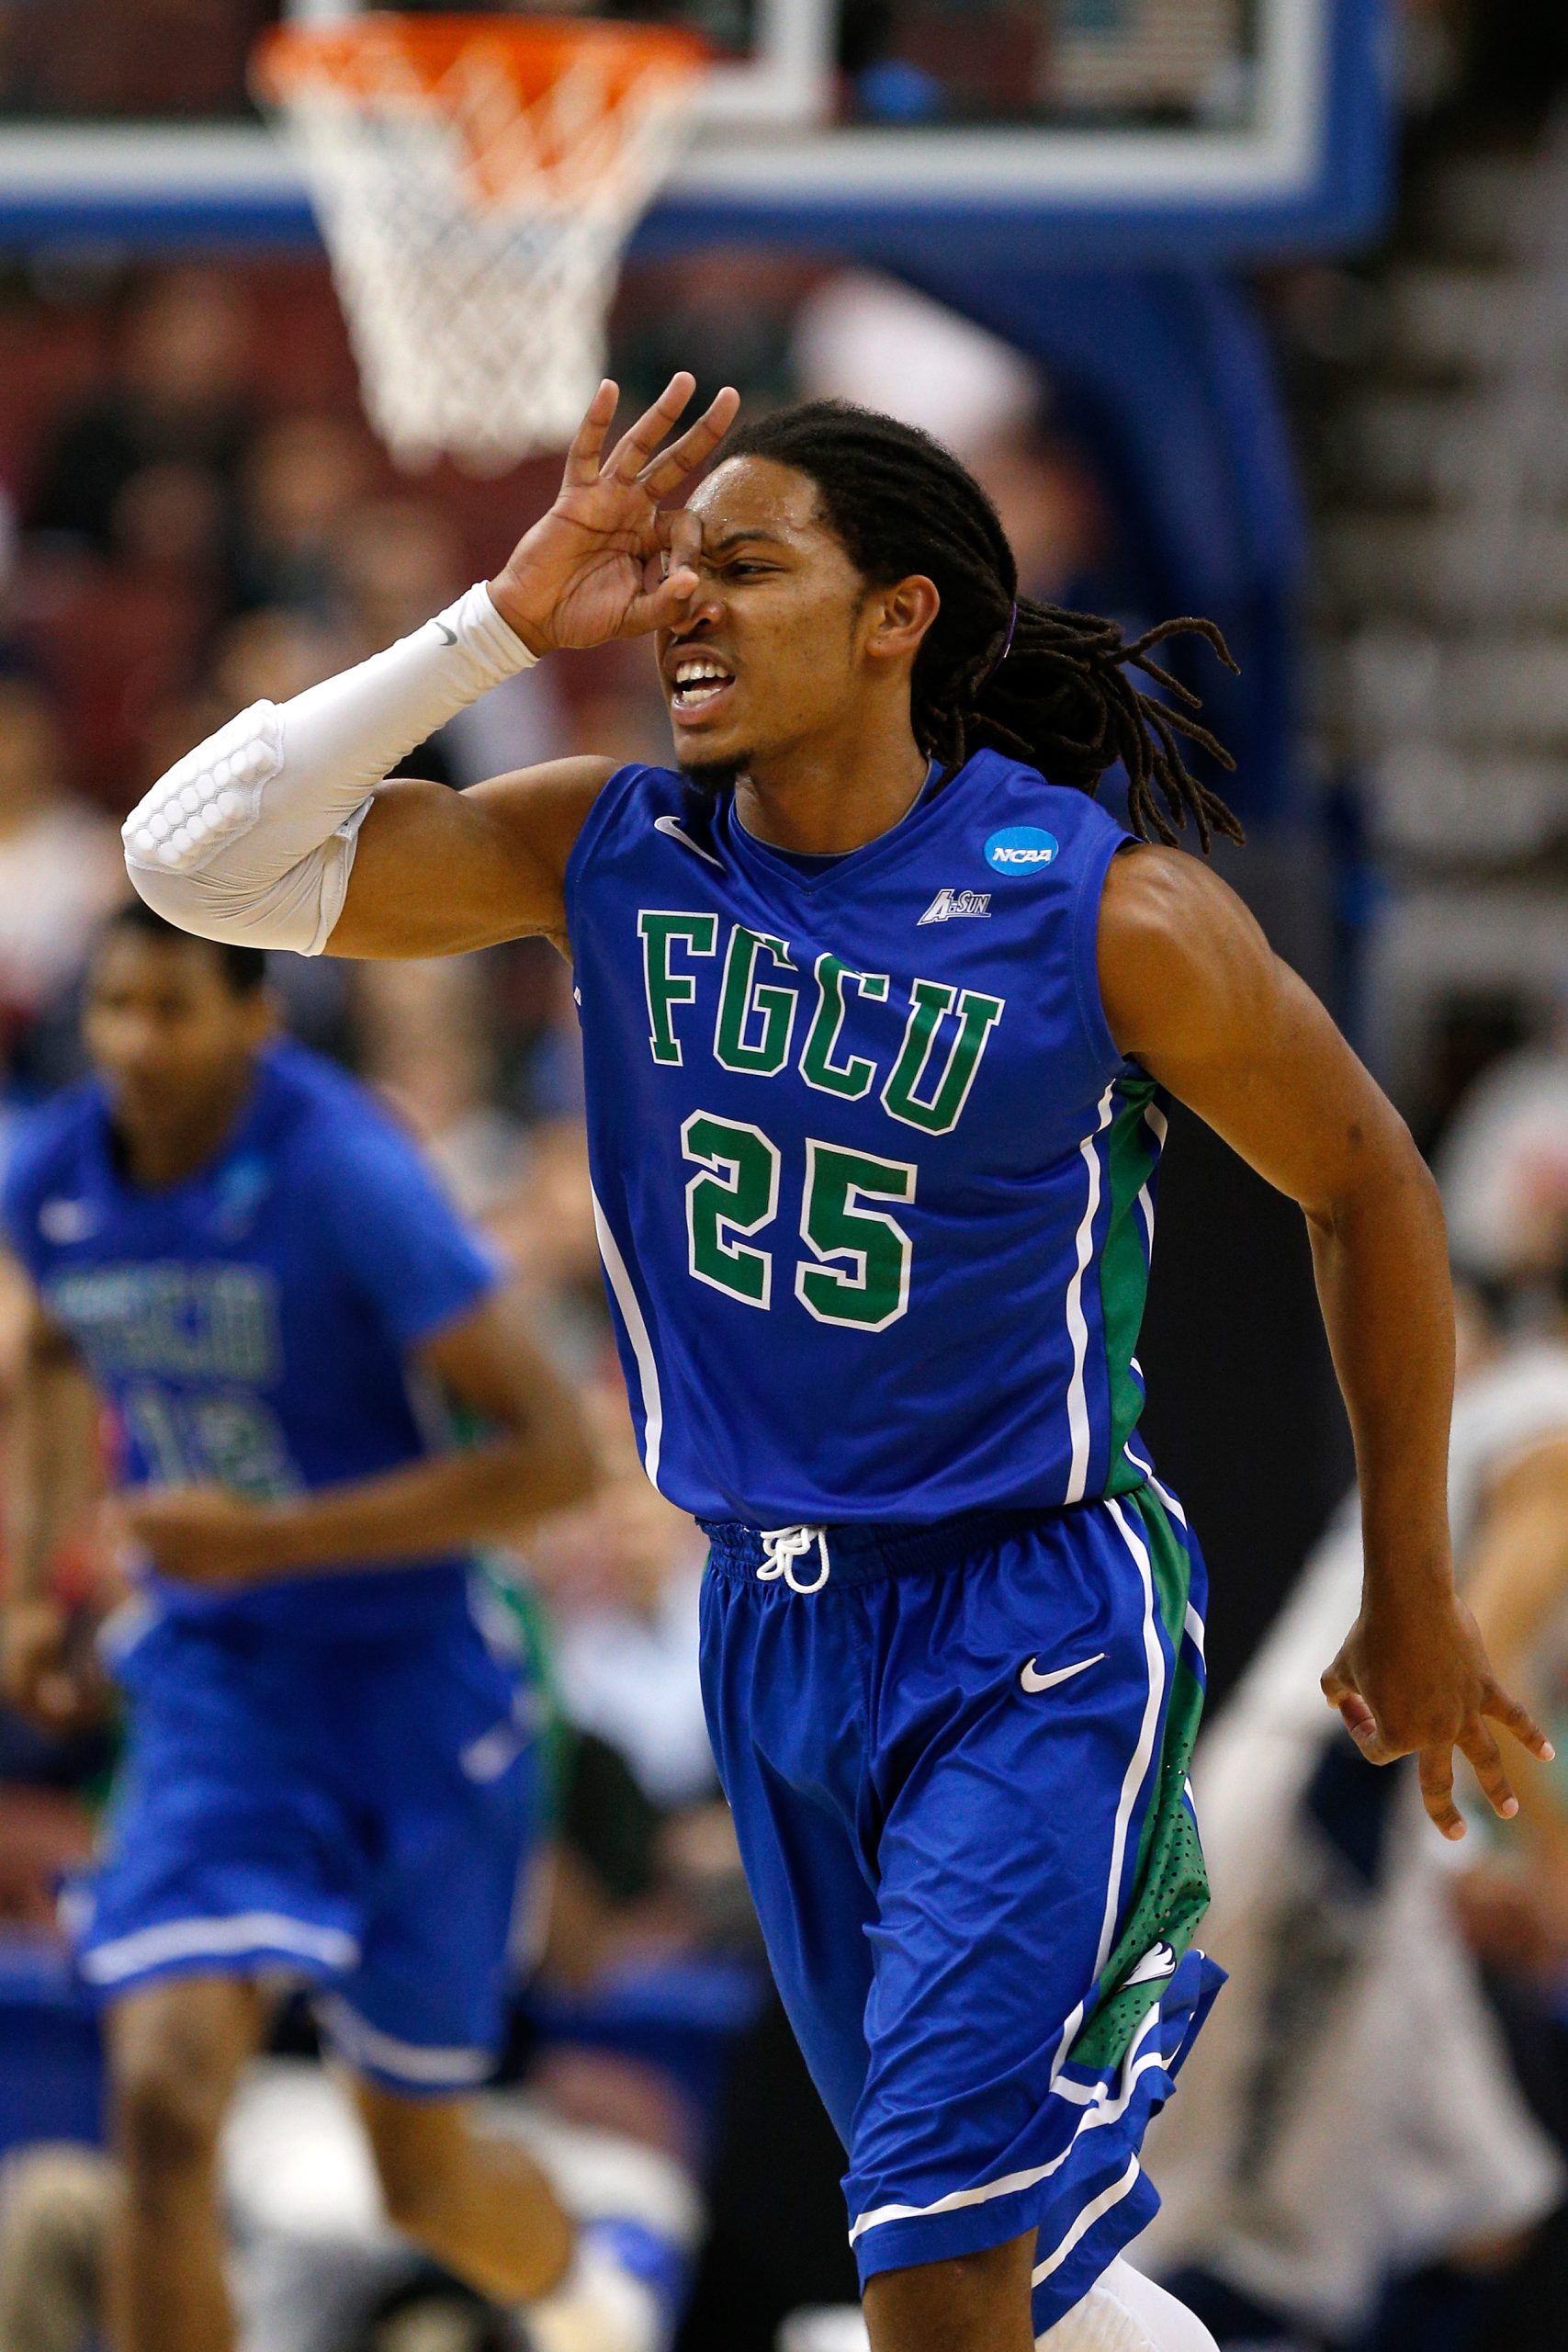 The 30 Most Influential NCAA MBB Teams of SLAM’s 30 Years: 2013 Florida Gulf Coast 